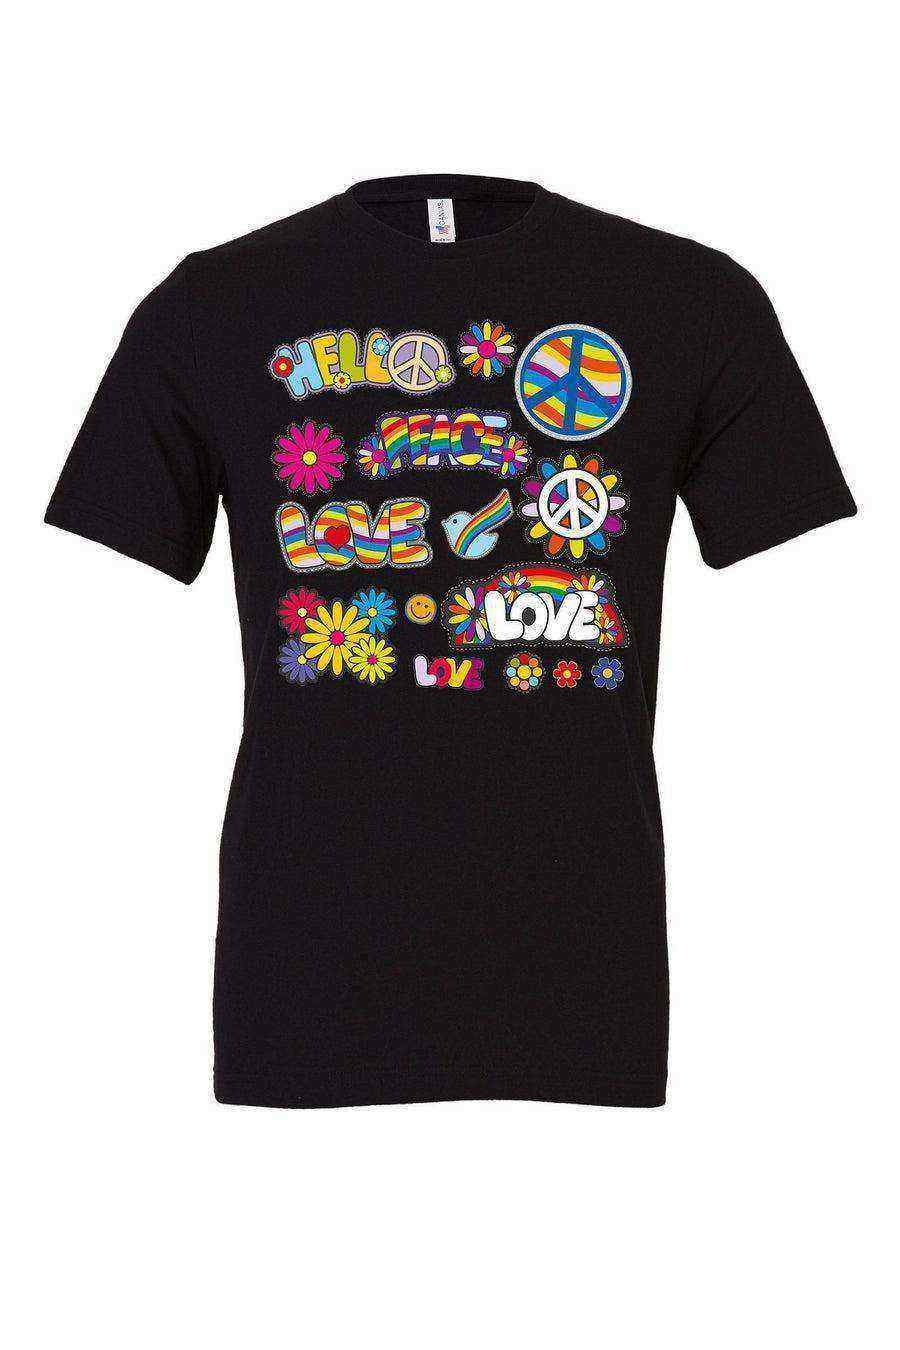 Womens | Groovy Patches Shirt | Retro Patches Shirt - Dylan's Tees